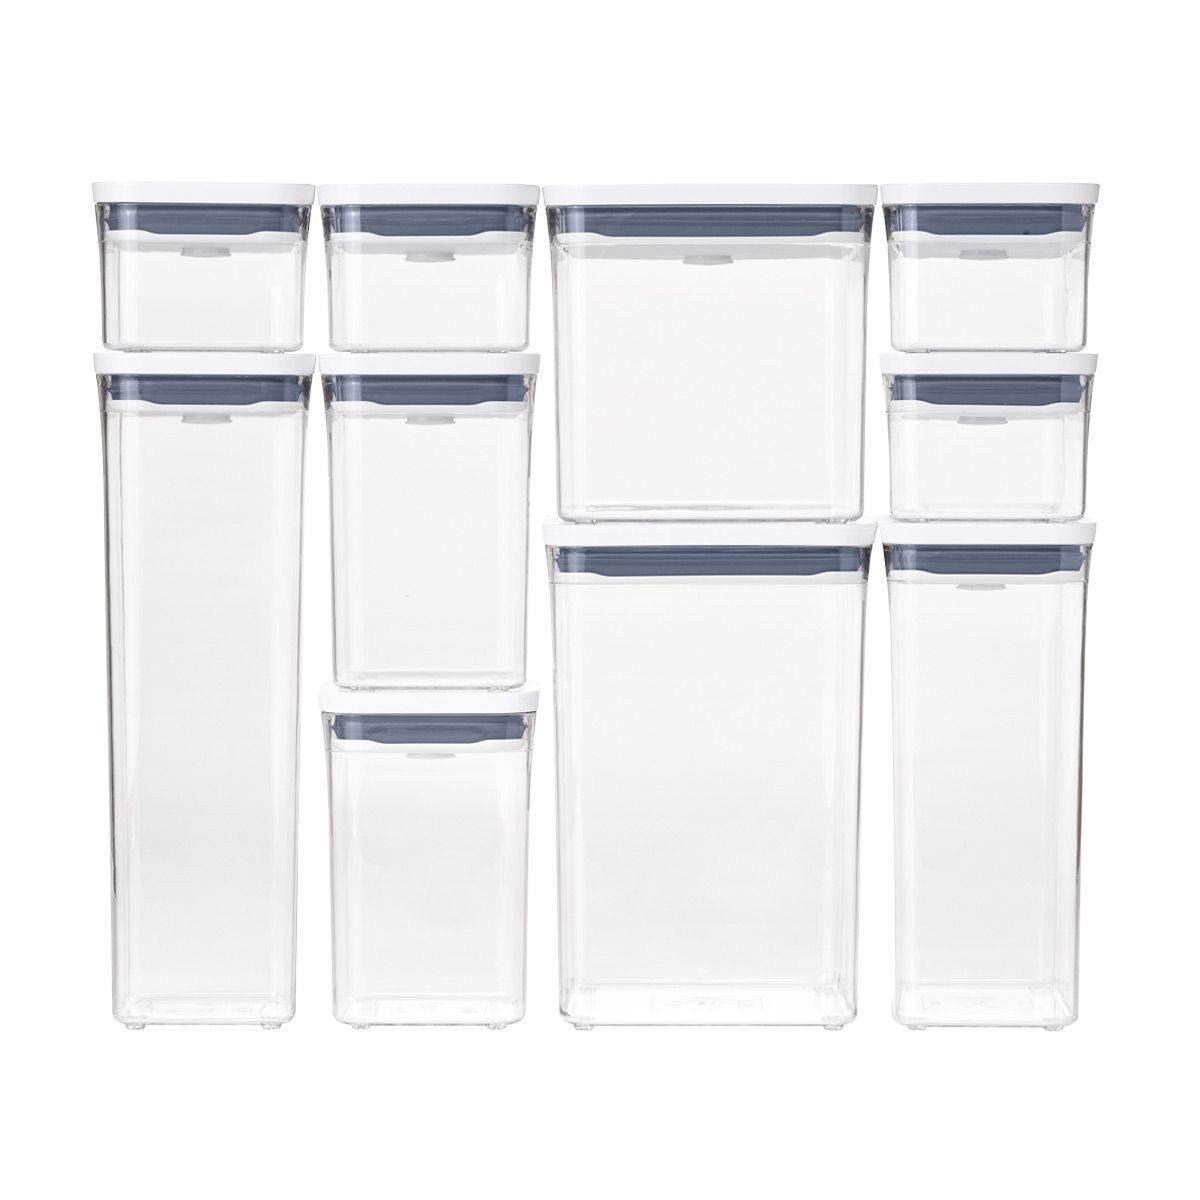 10-Piece POP Container Set | The Container Store